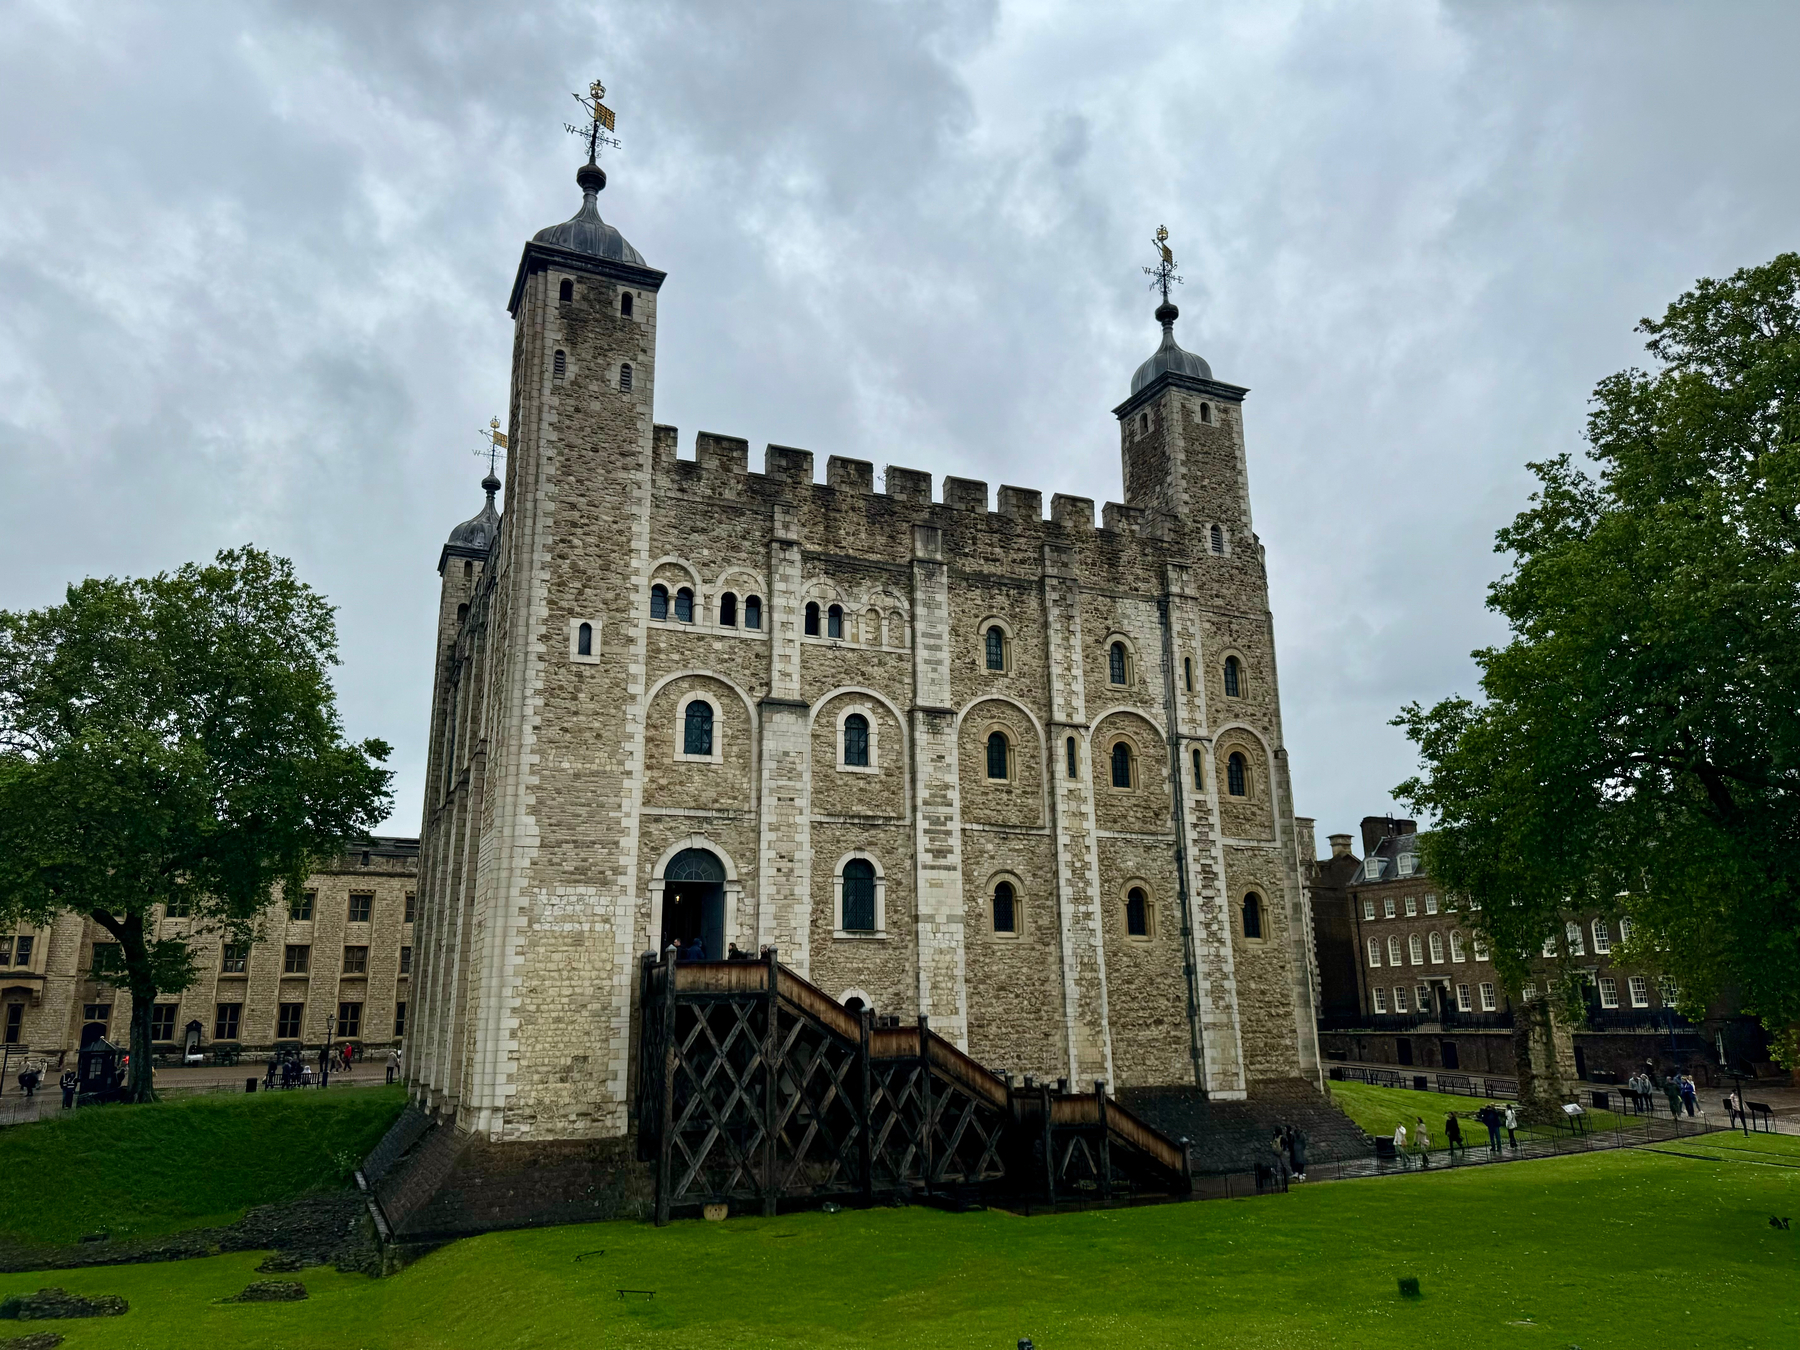 The White Tower, the central keep of the Tower of London, under an overcast sky with visitors walking around its base.